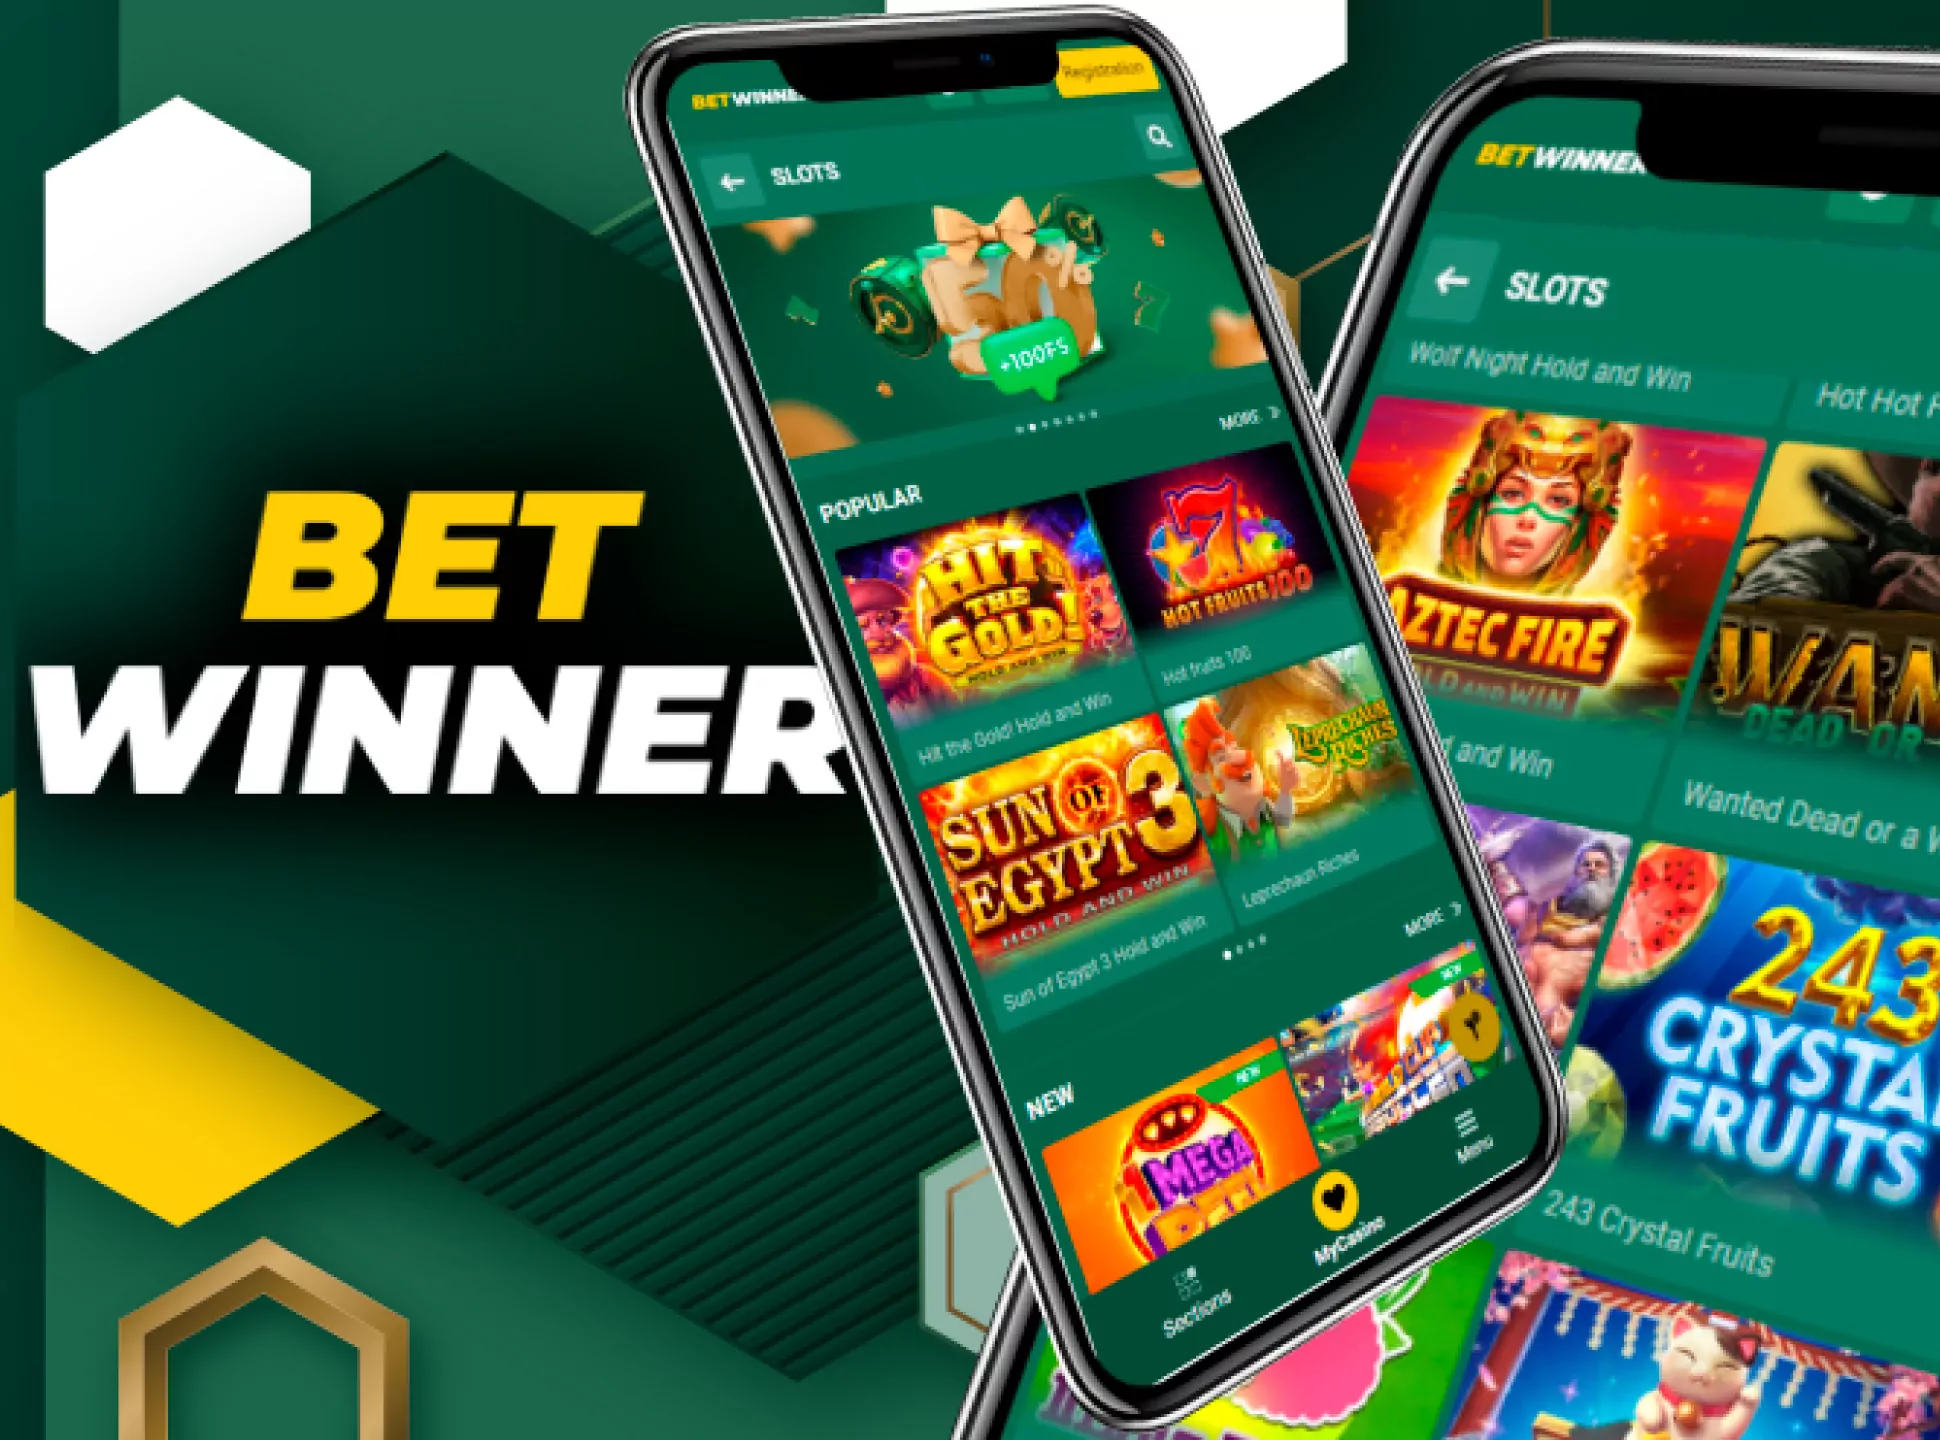 Play casino games via your mobile browser.